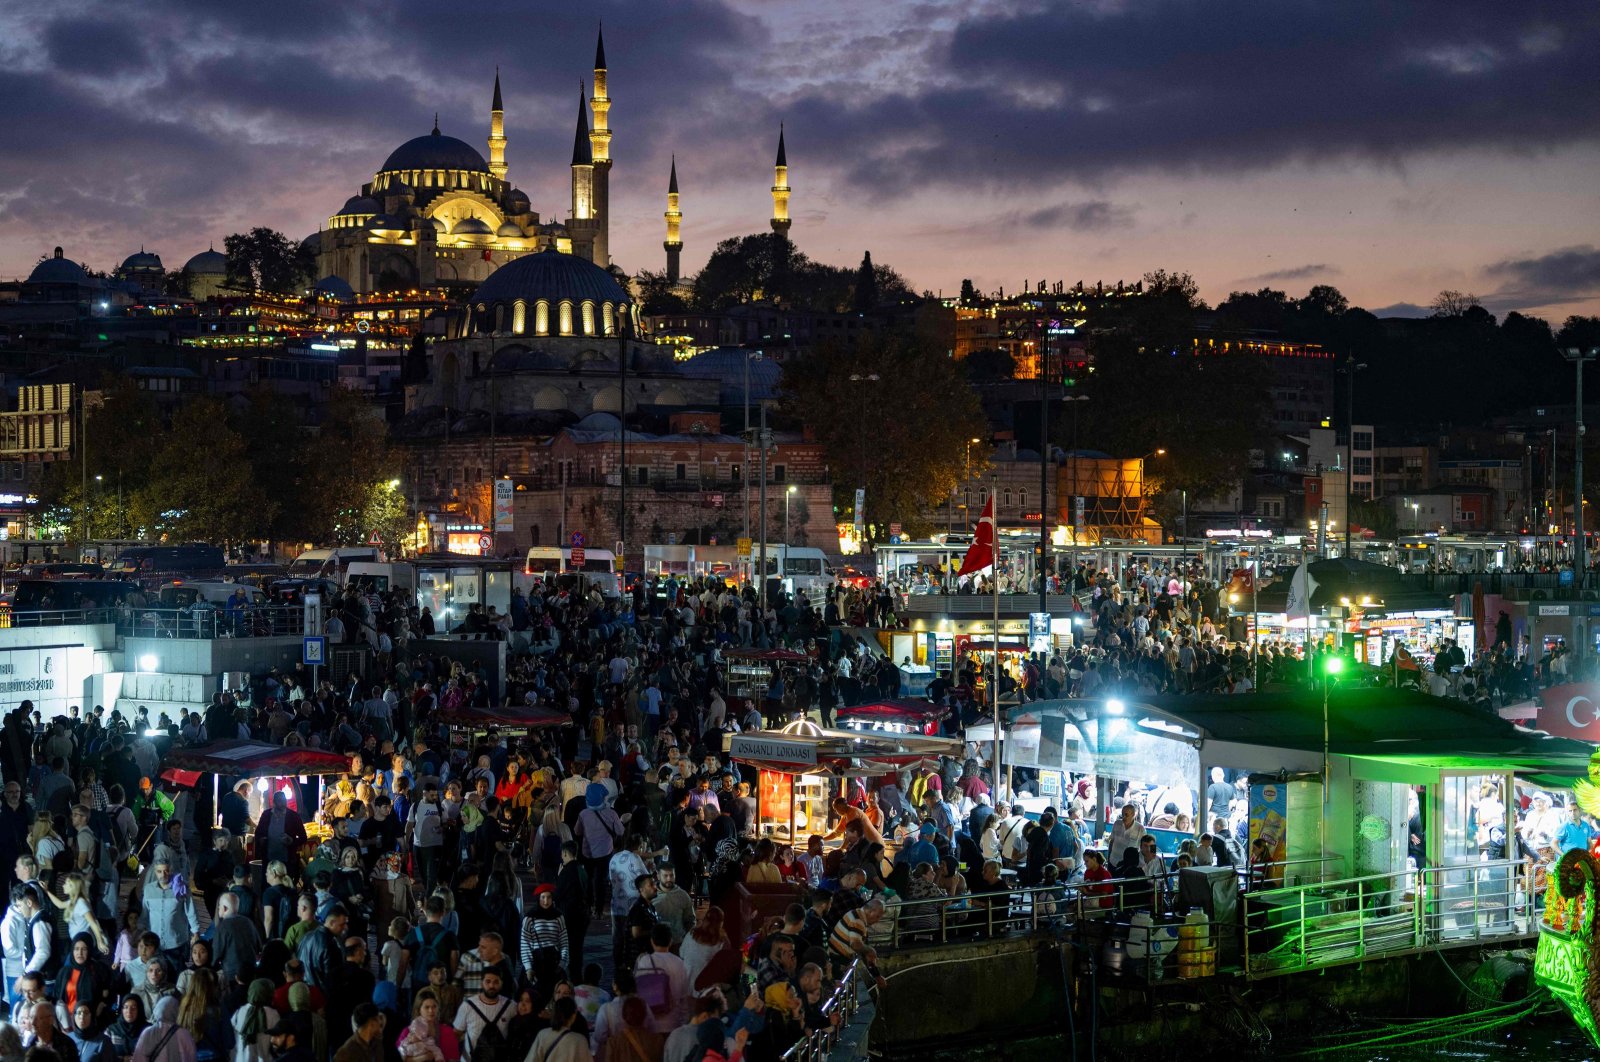 People walk around Eminönü Square in Istanbul during celebrations to mark the 100th anniversary of the Republic of Türkiye, Oct. 29, 2023. (AFP Photo)